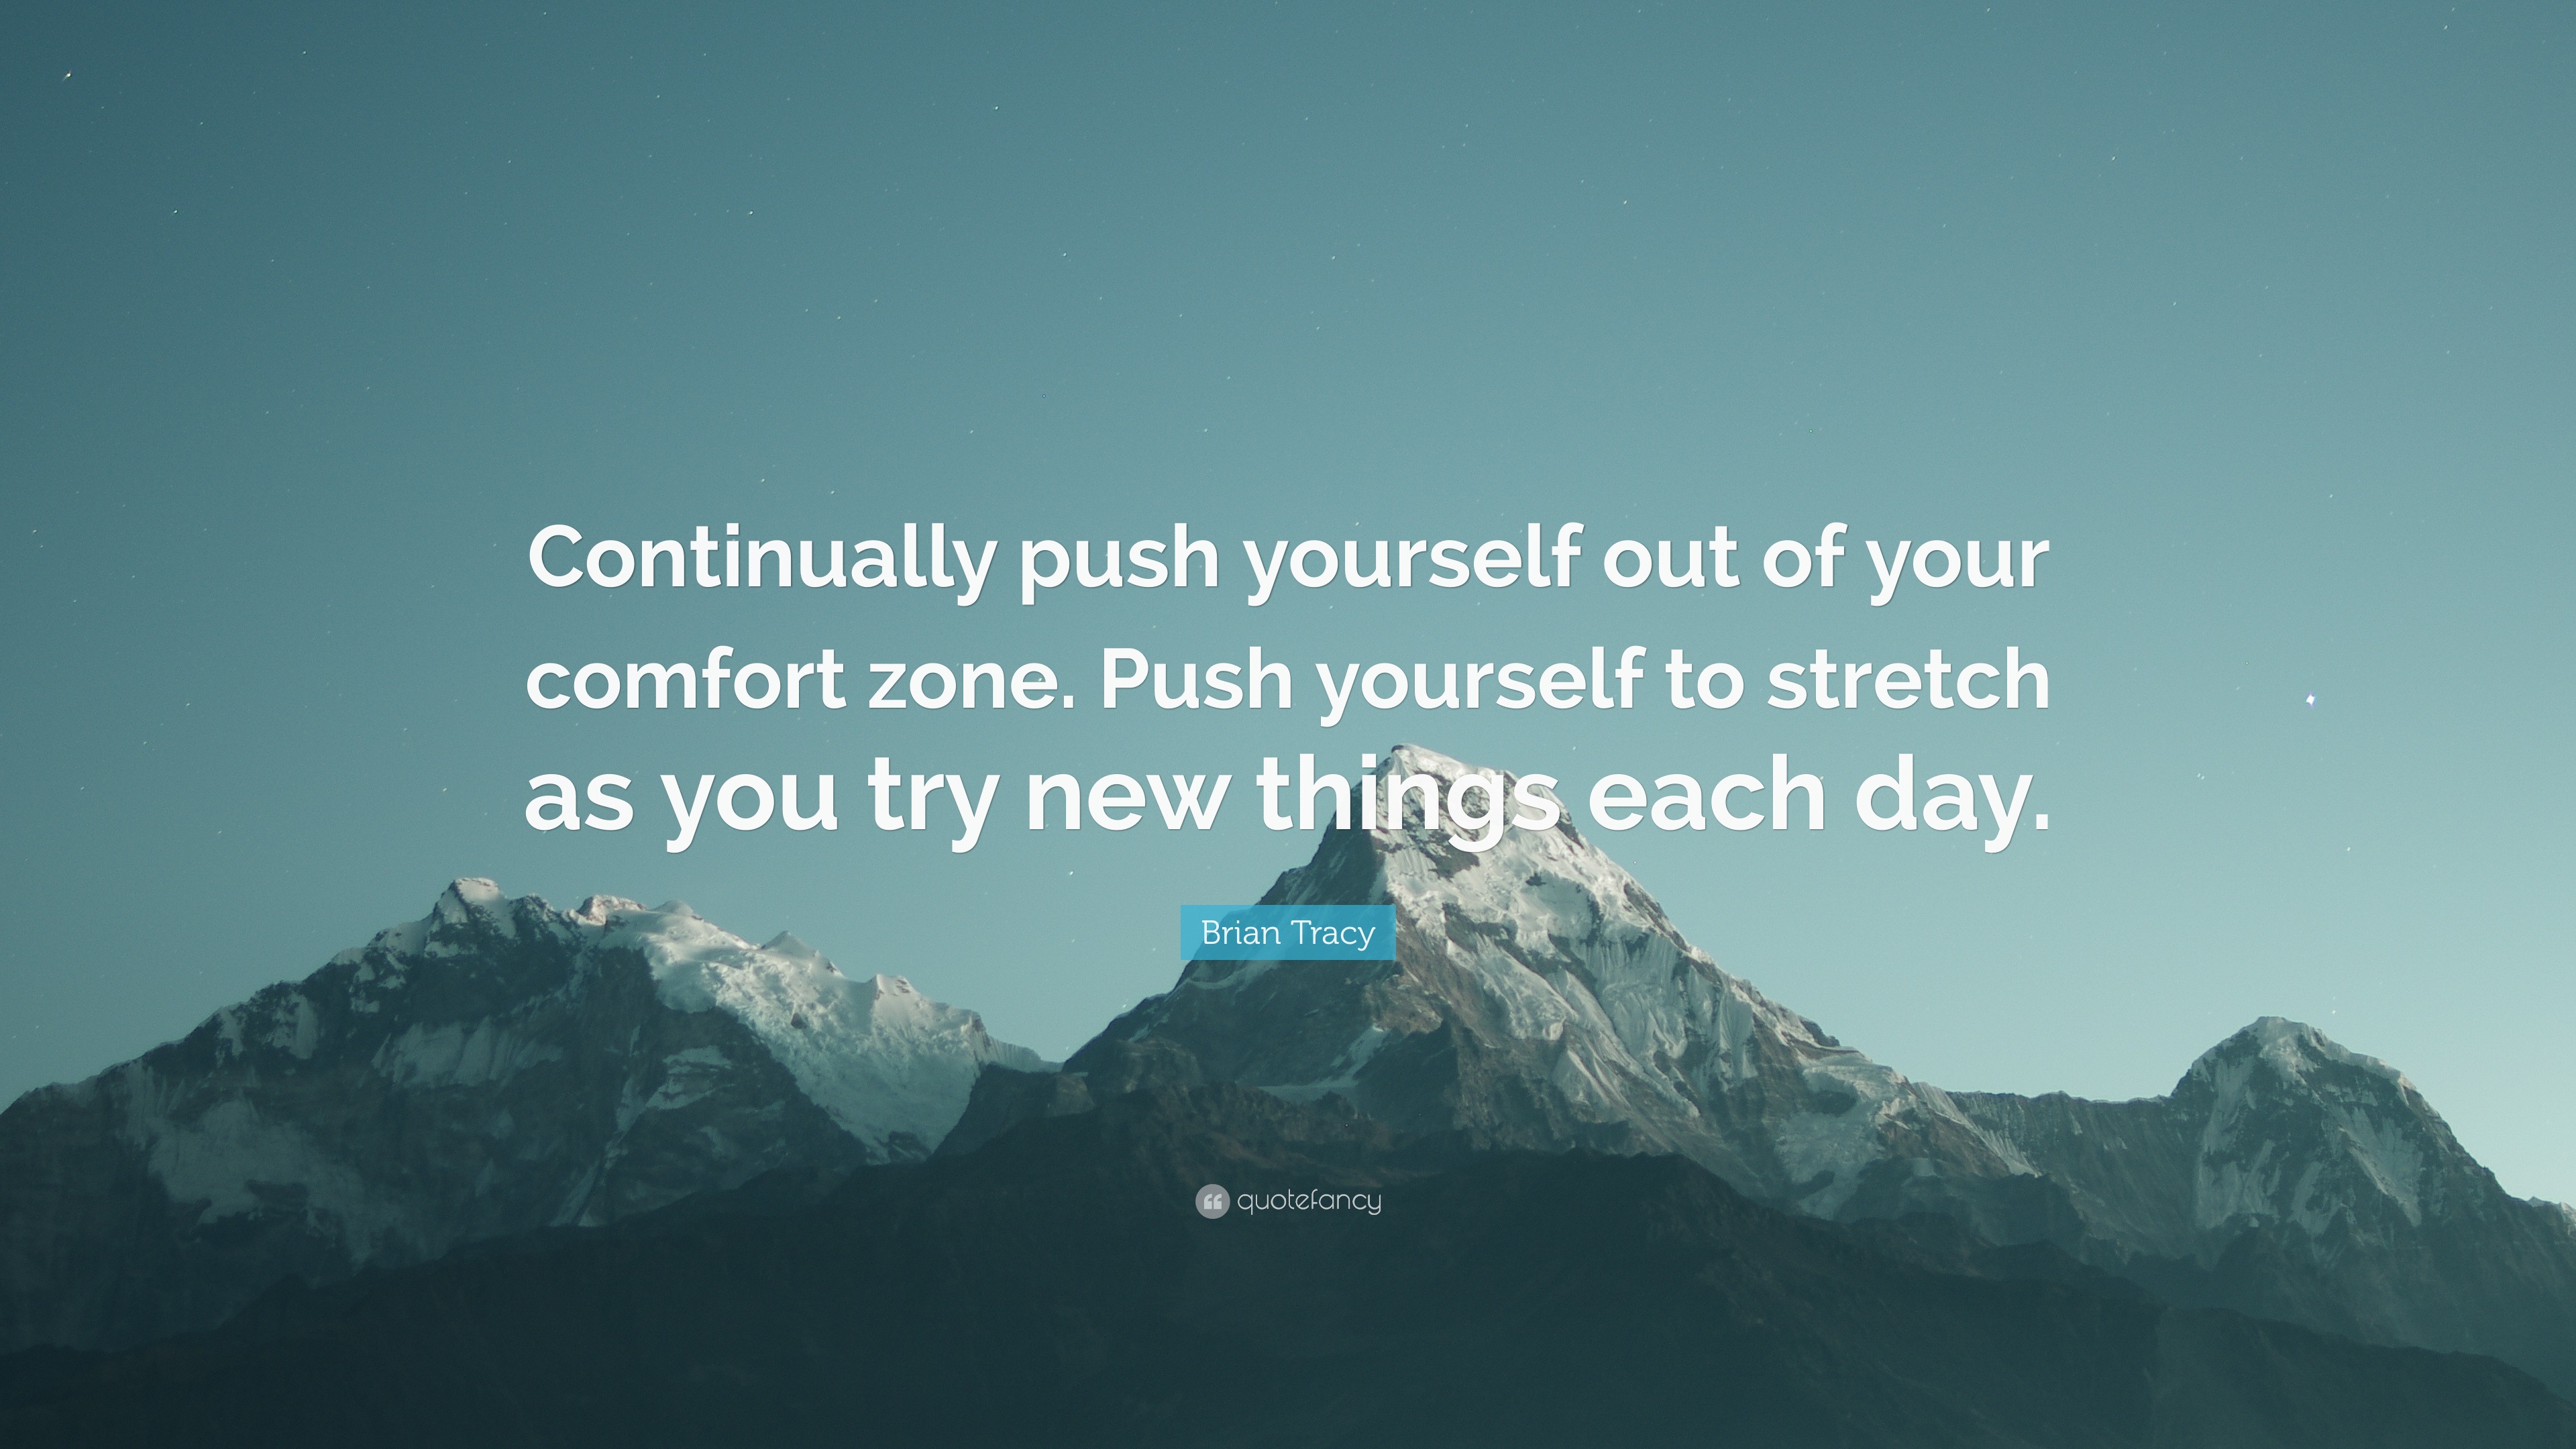 Brian Tracy Quote: “Continually push yourself out of your comfort